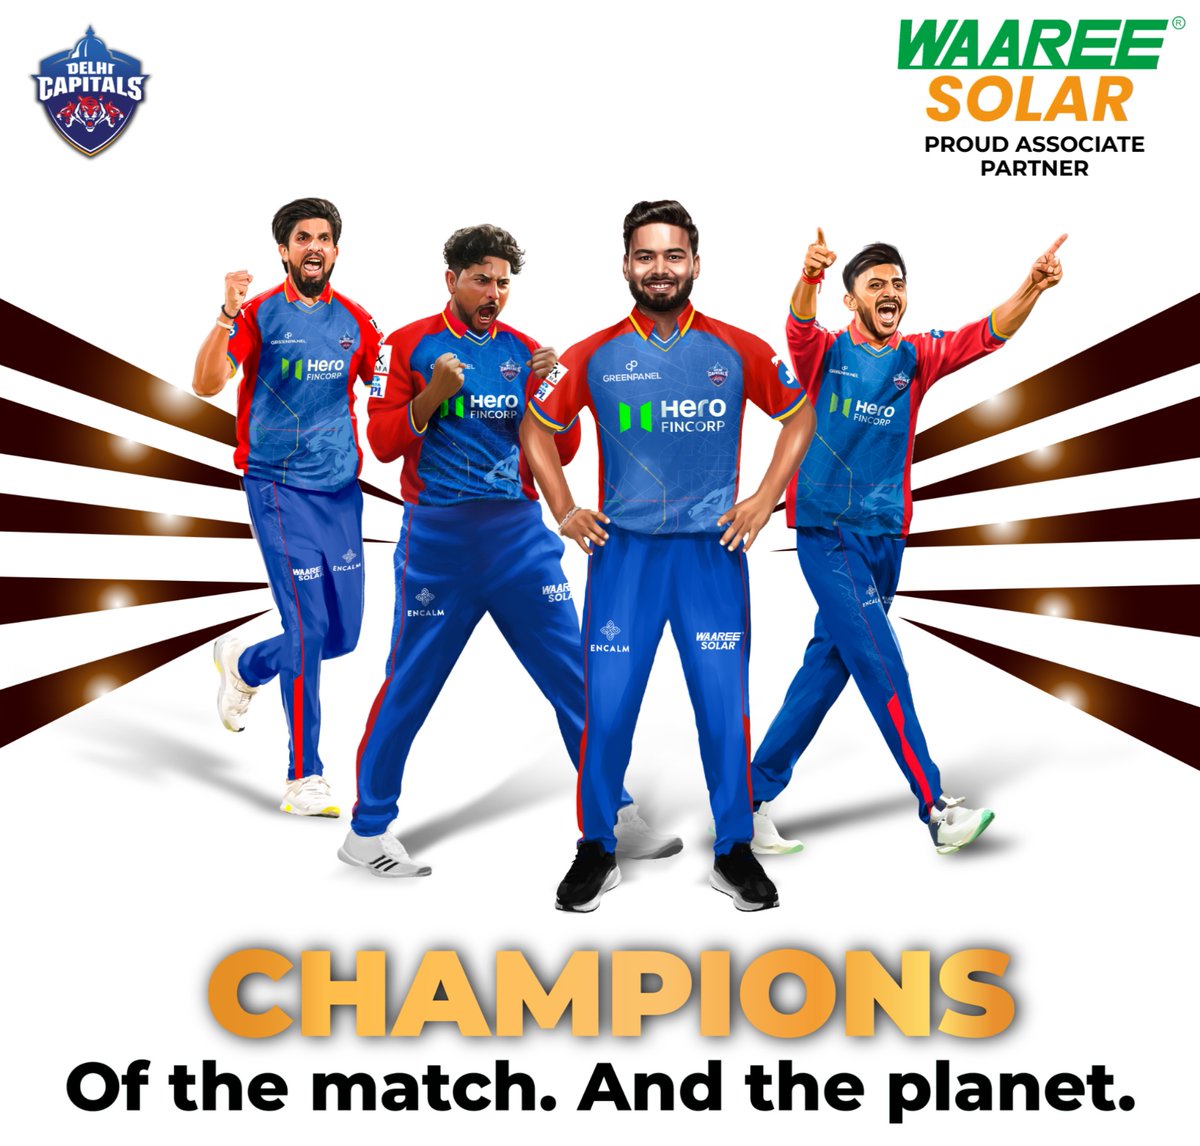 🏆Sustainable champions on the field! Powering performance with solar energy. Waaree Solar's green solutions drive Delhi Capitals' winning streak. Choosing renewable power is a victory for your wallet and the planet. #WaareeSolar #DelhiCapitals #IPL2024 #PoweringPerformance